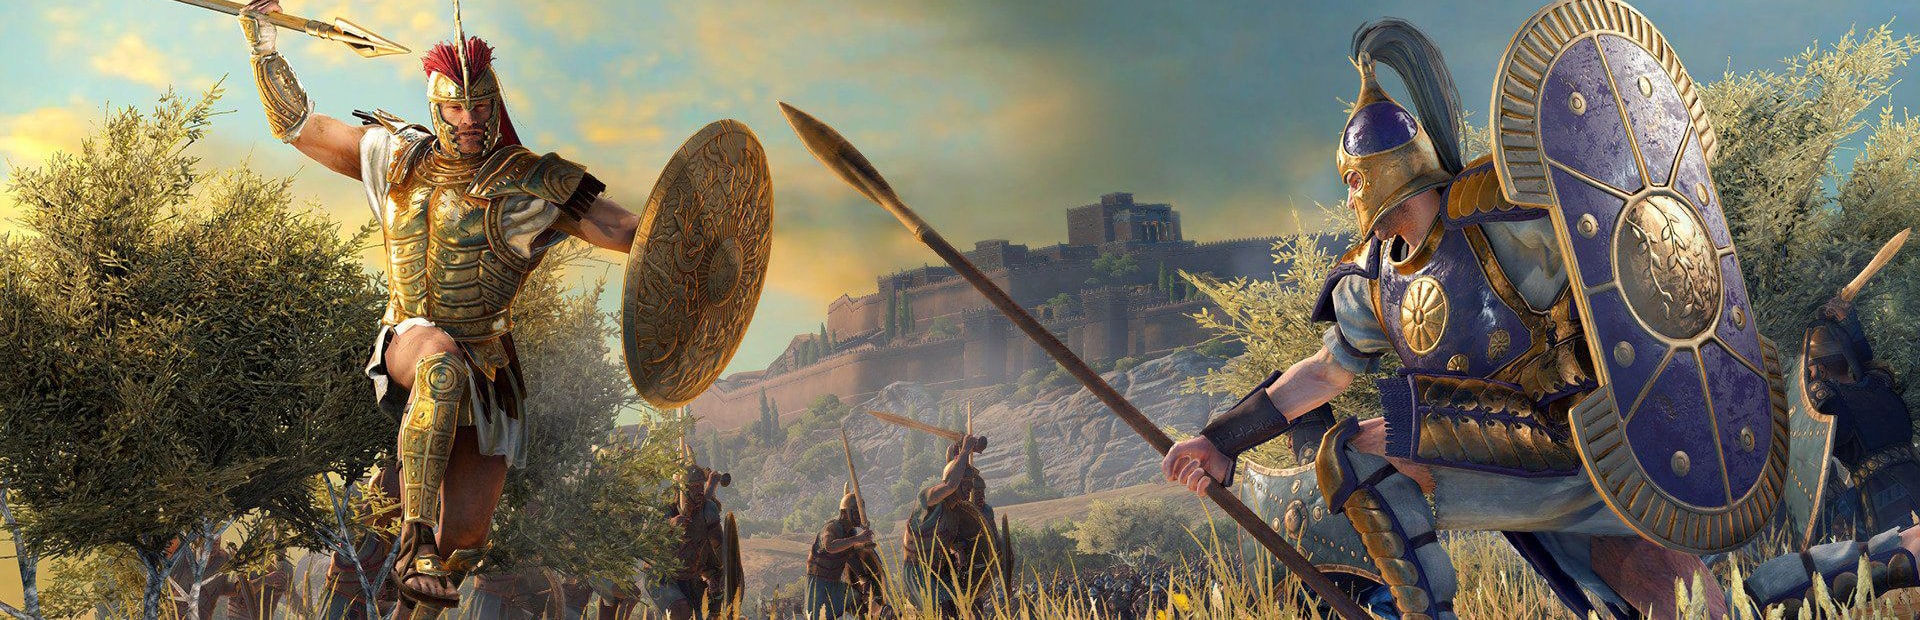 A Total War Saga: TROY for PC - Related Items